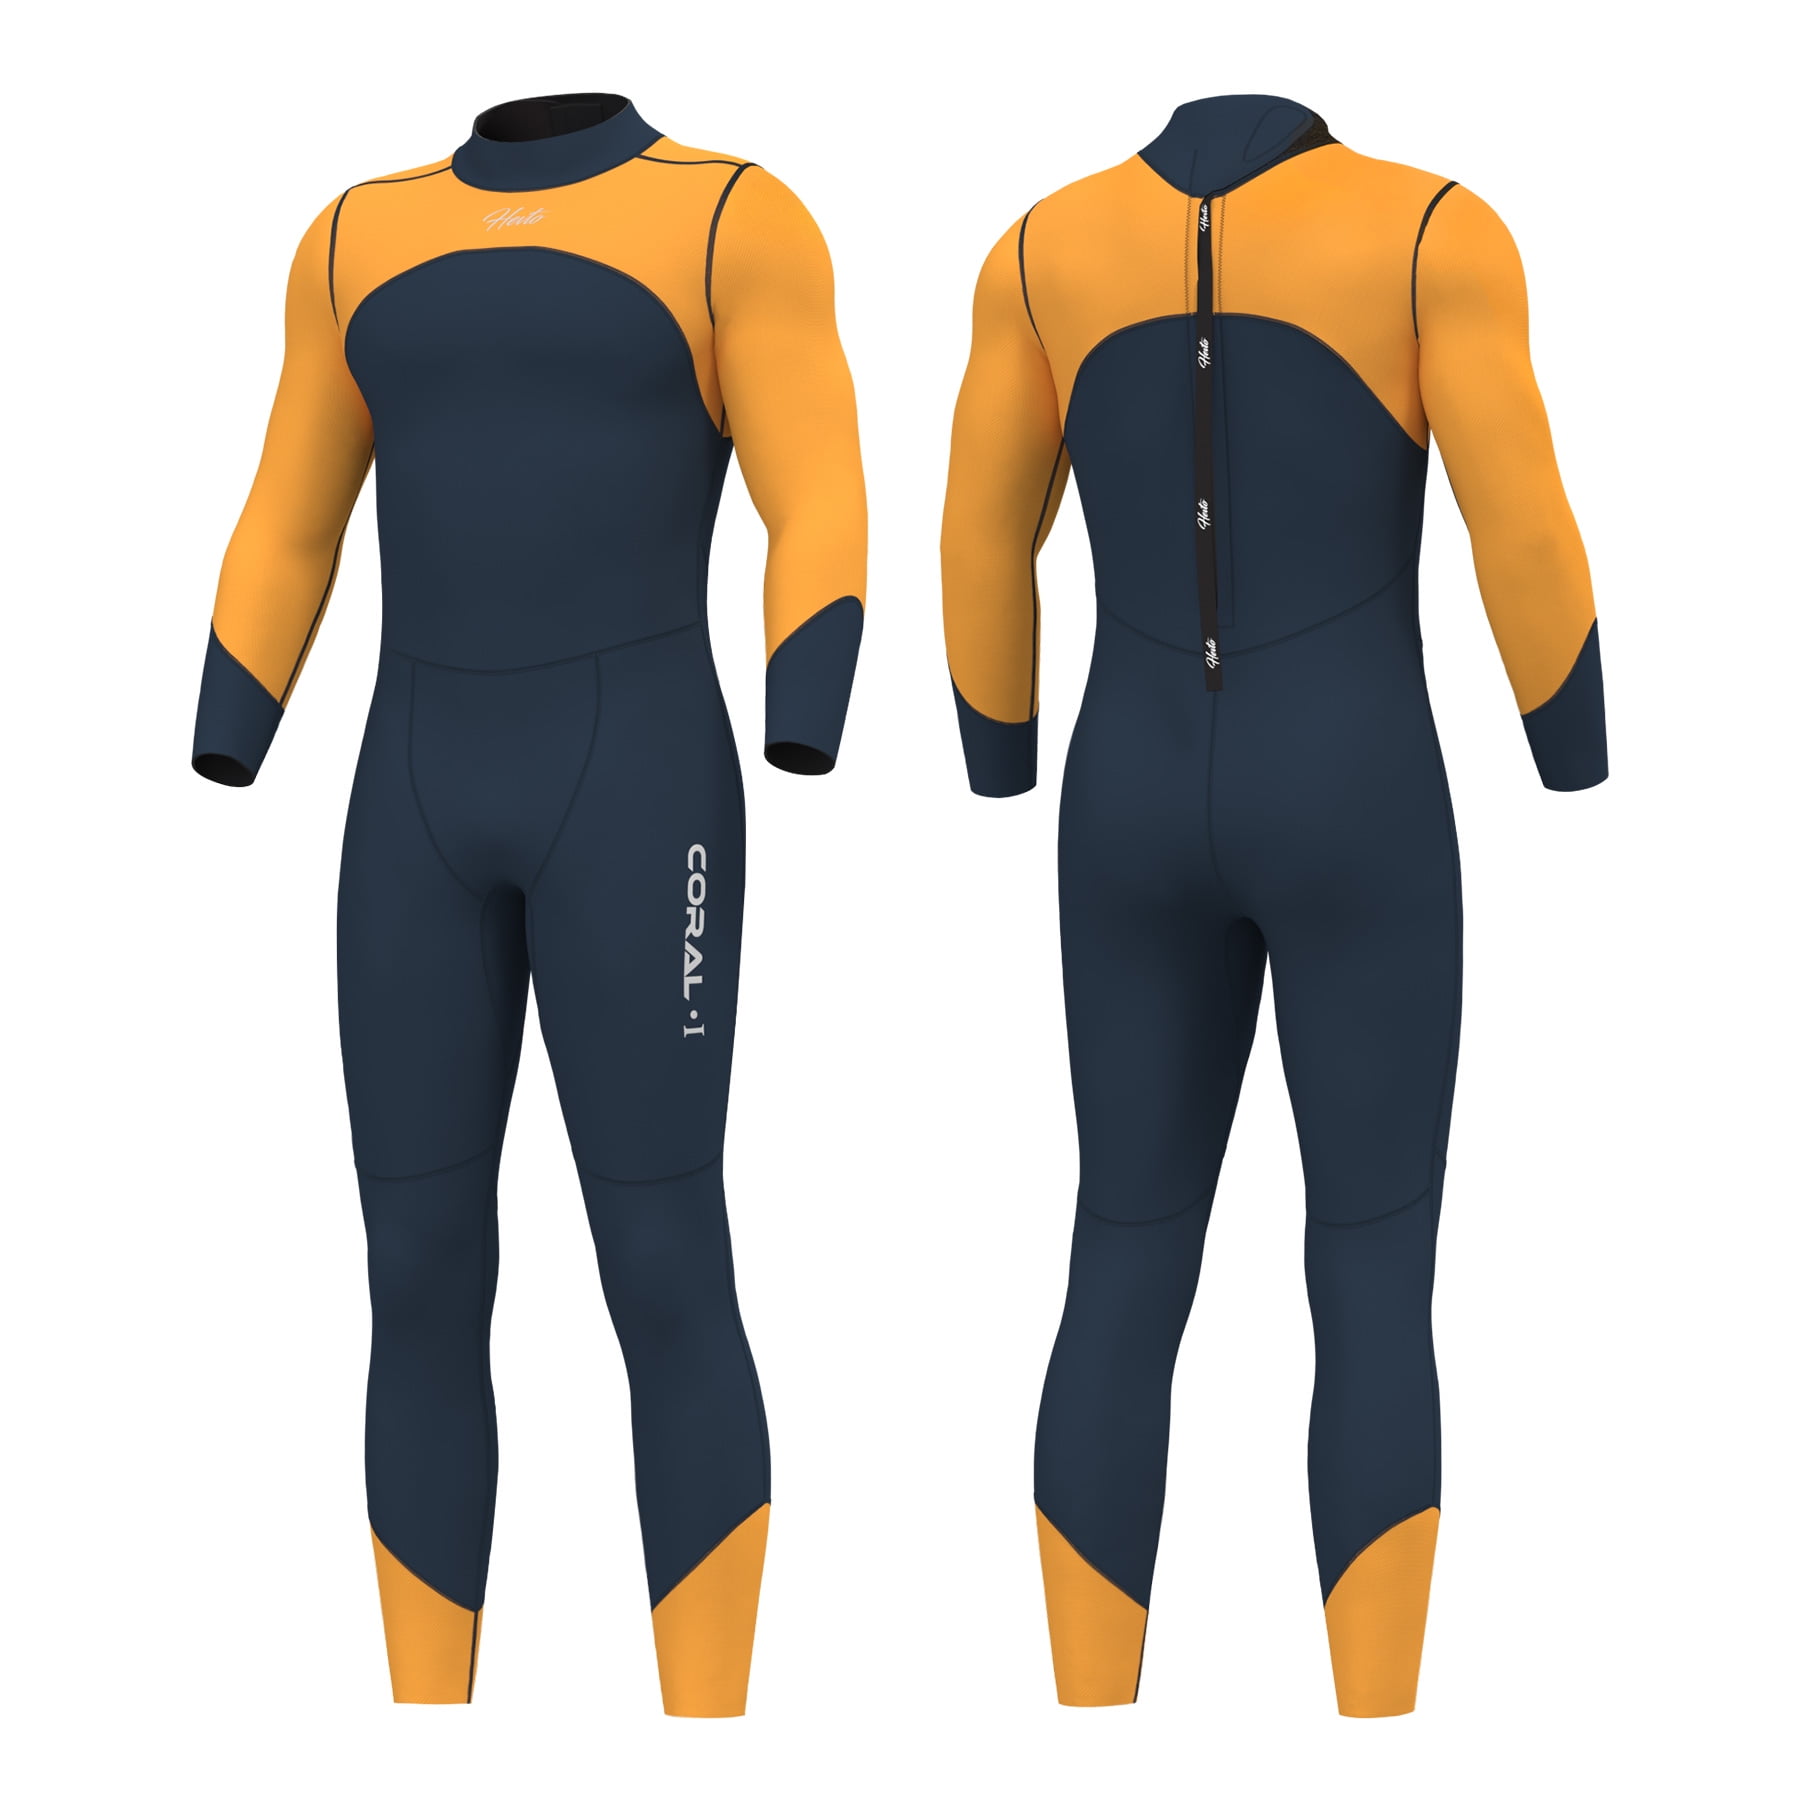 Hevto Wetsuits Men 3mm Neoprene Full Scuba Diving Suits Surfing Swimming Long Sleeve Keep Warm Back Zip for Water Sports 